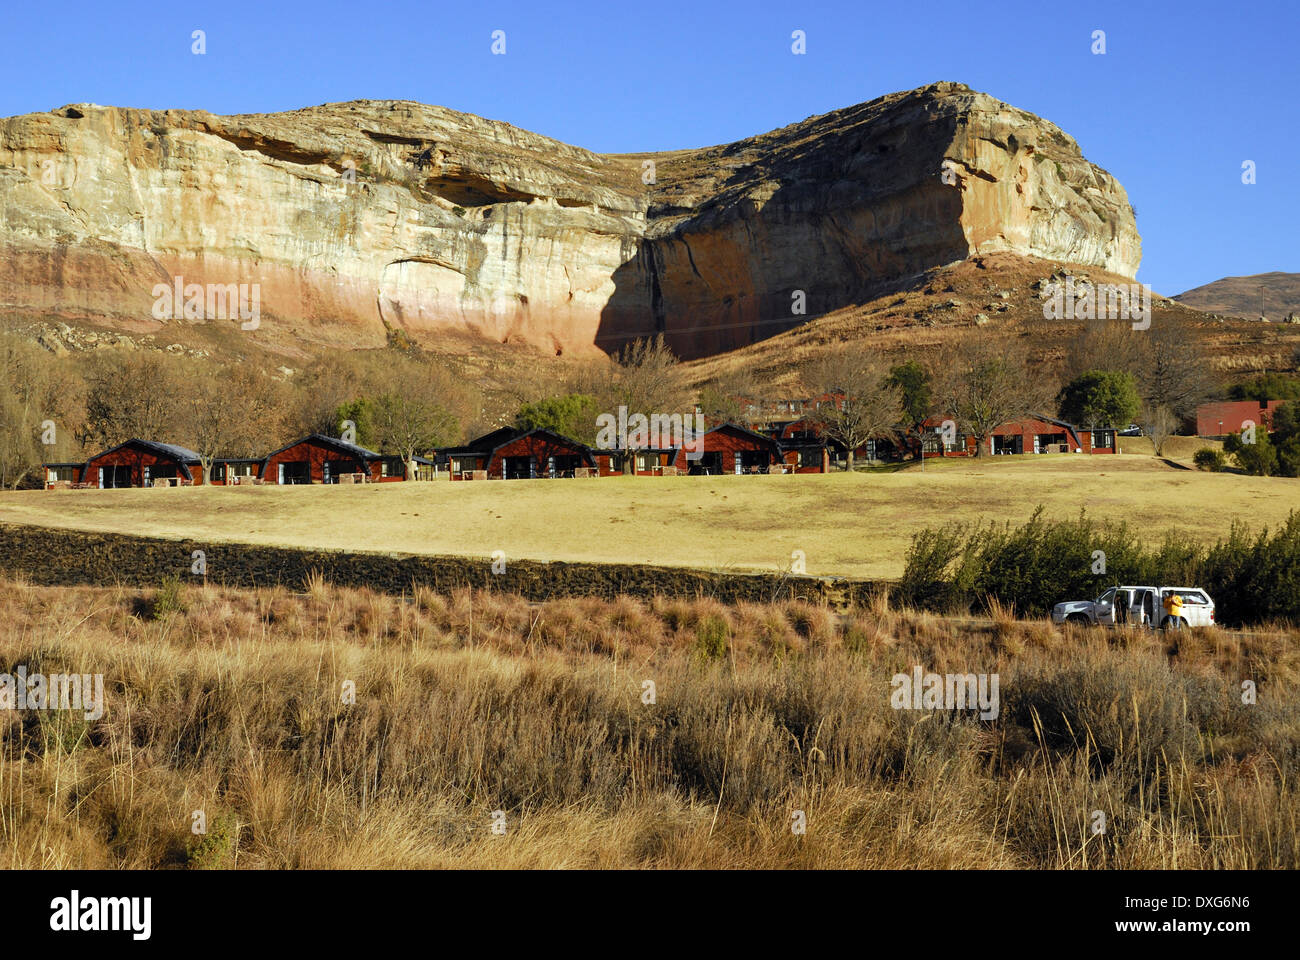 A restcamp at Golden Gate National Park,eastern Freestate, South Africa Stock Photo